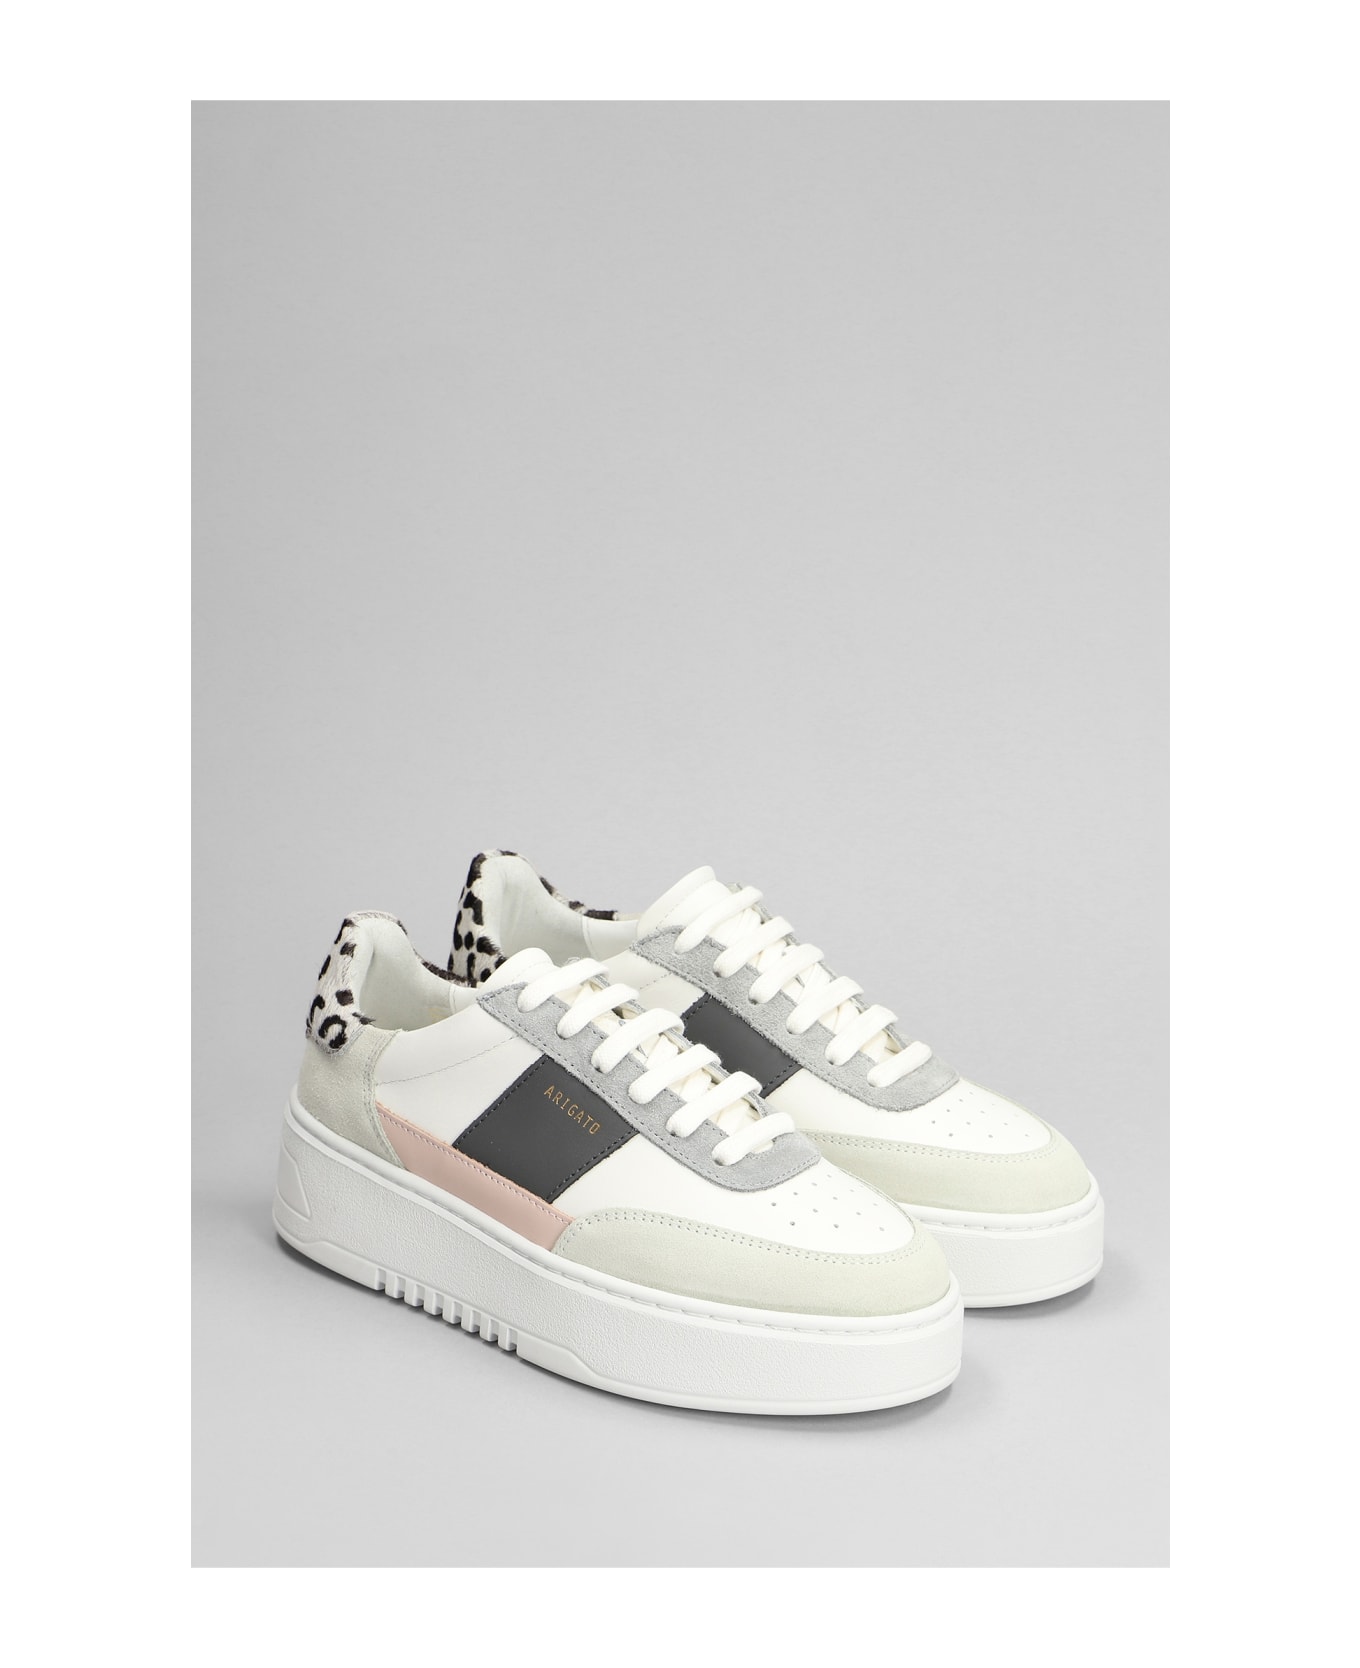 Axel Arigato Orbit Sneakers In White Suede And Leather - white ウェッジシューズ